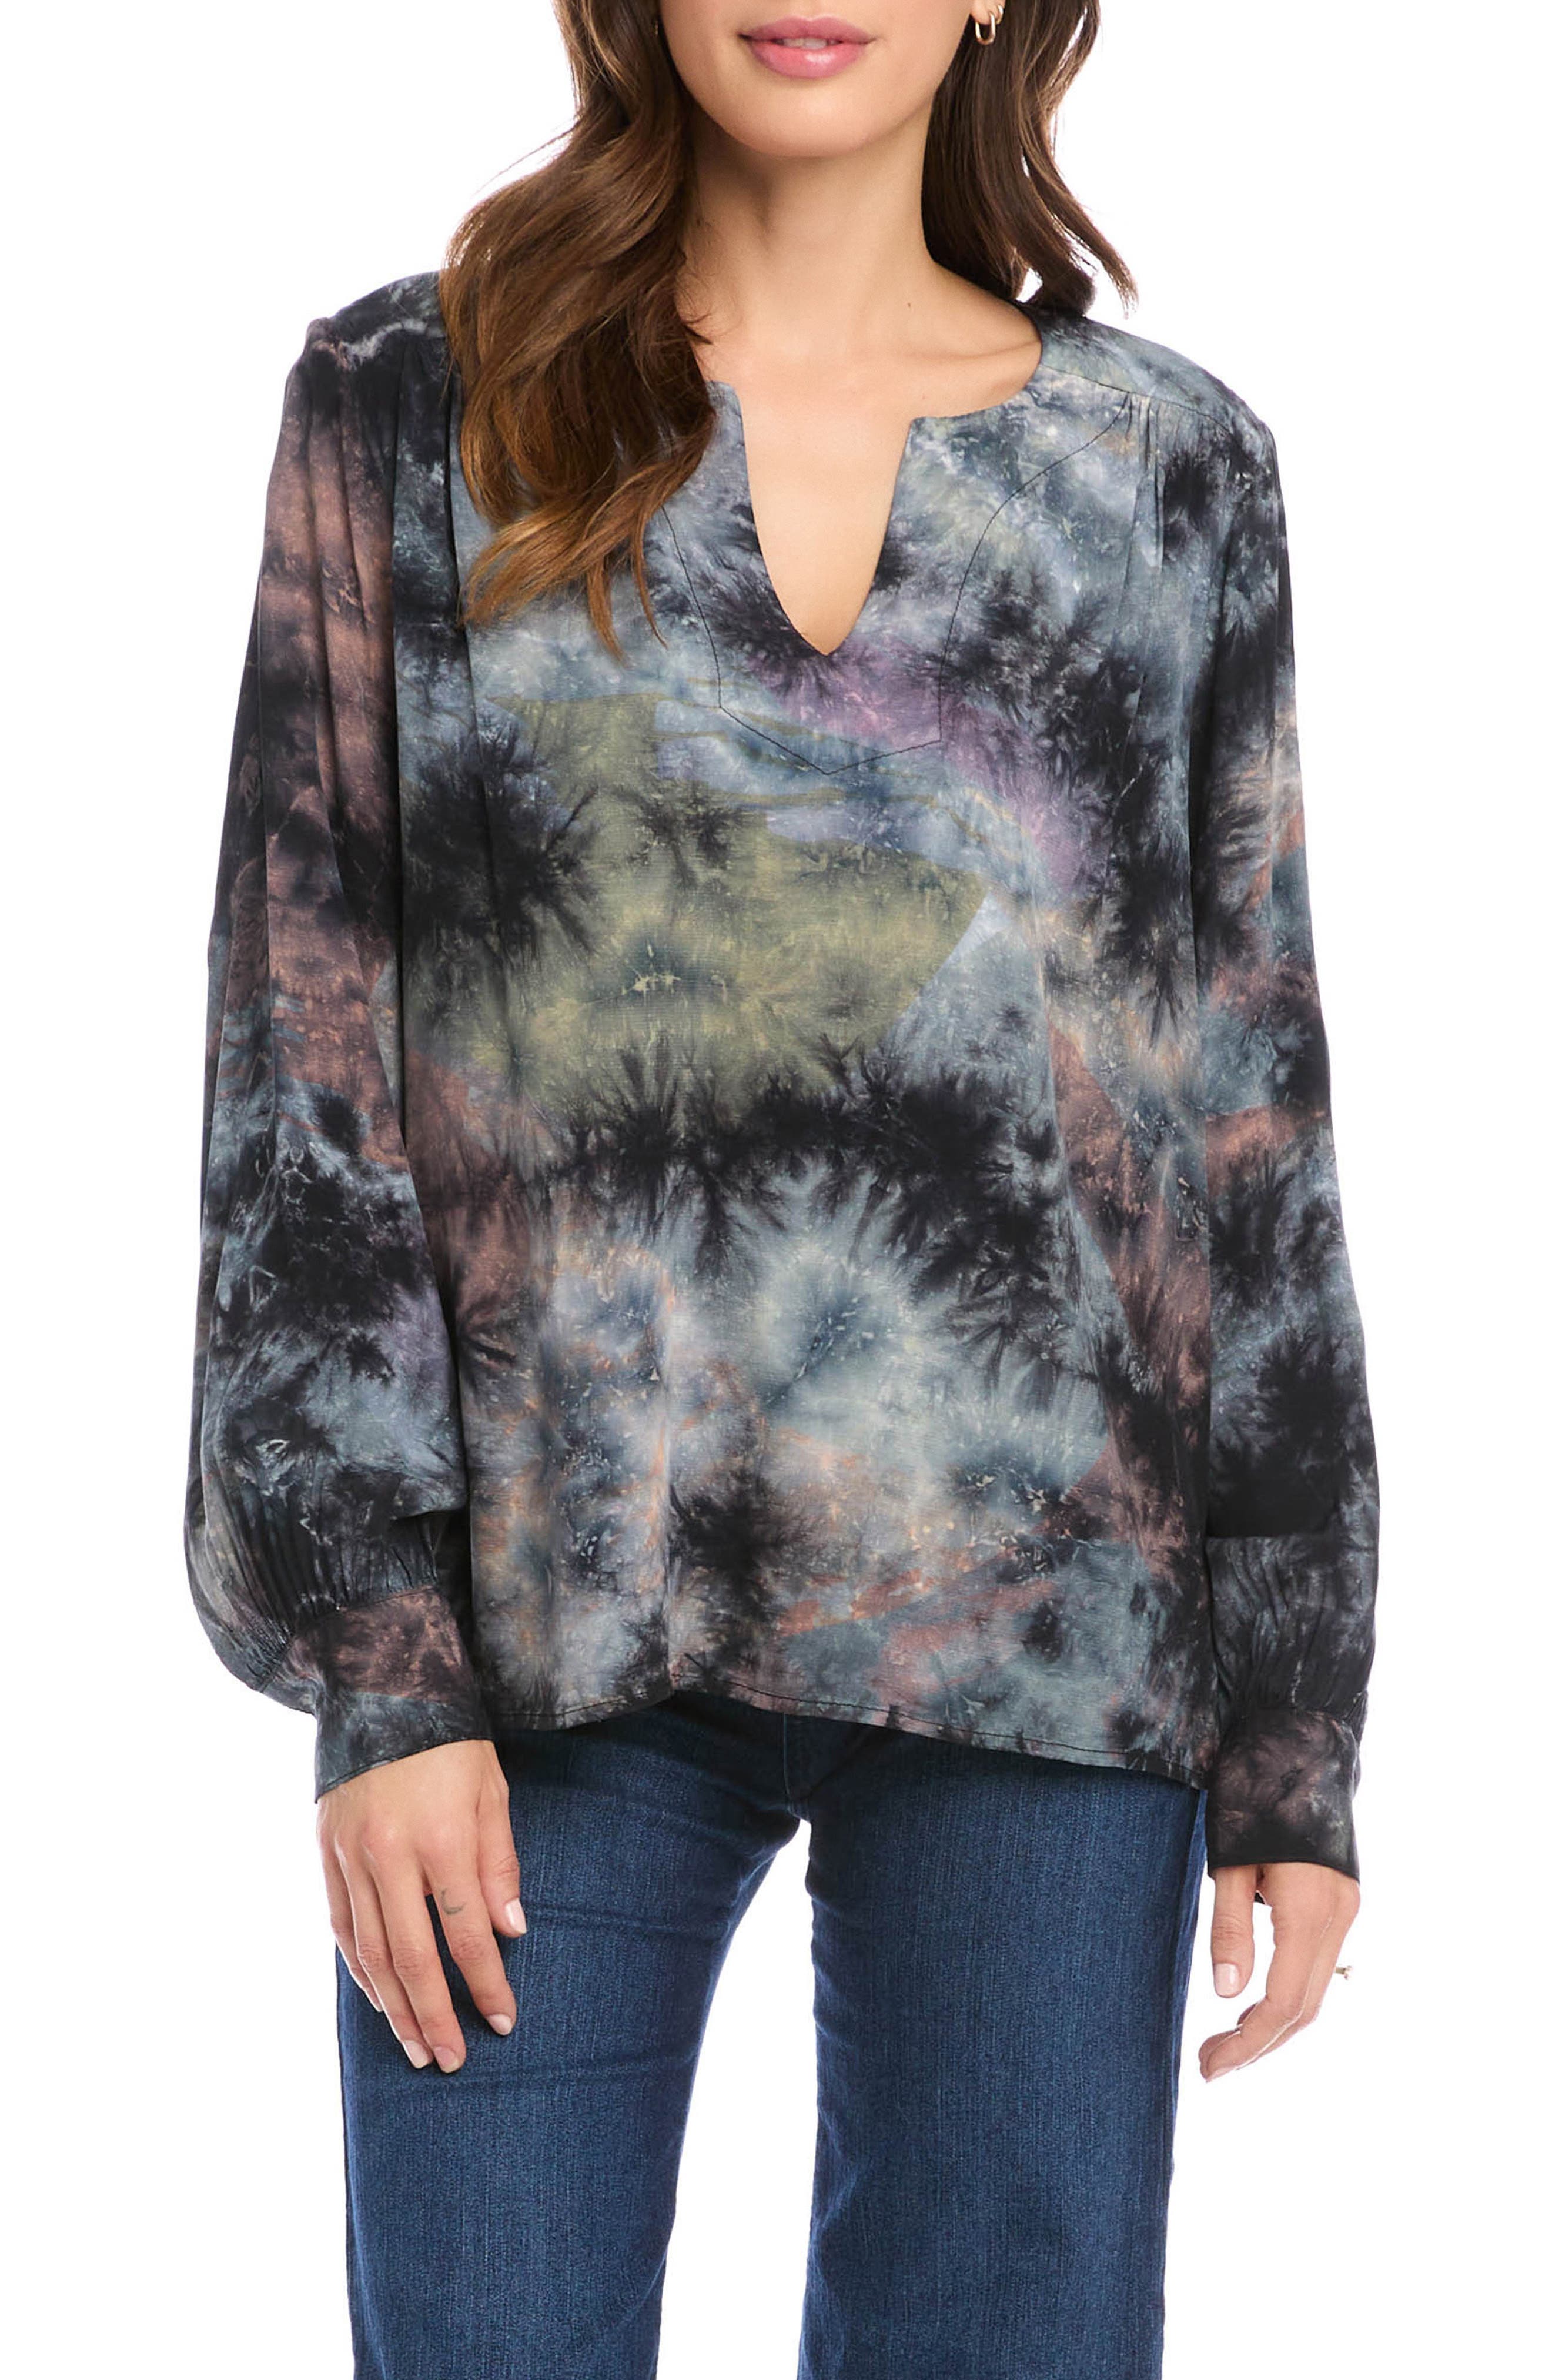 Women's Tie Dye Top Tunic Yoga Poncho Cover Up Butterfly Style Sleeveless Blouse 